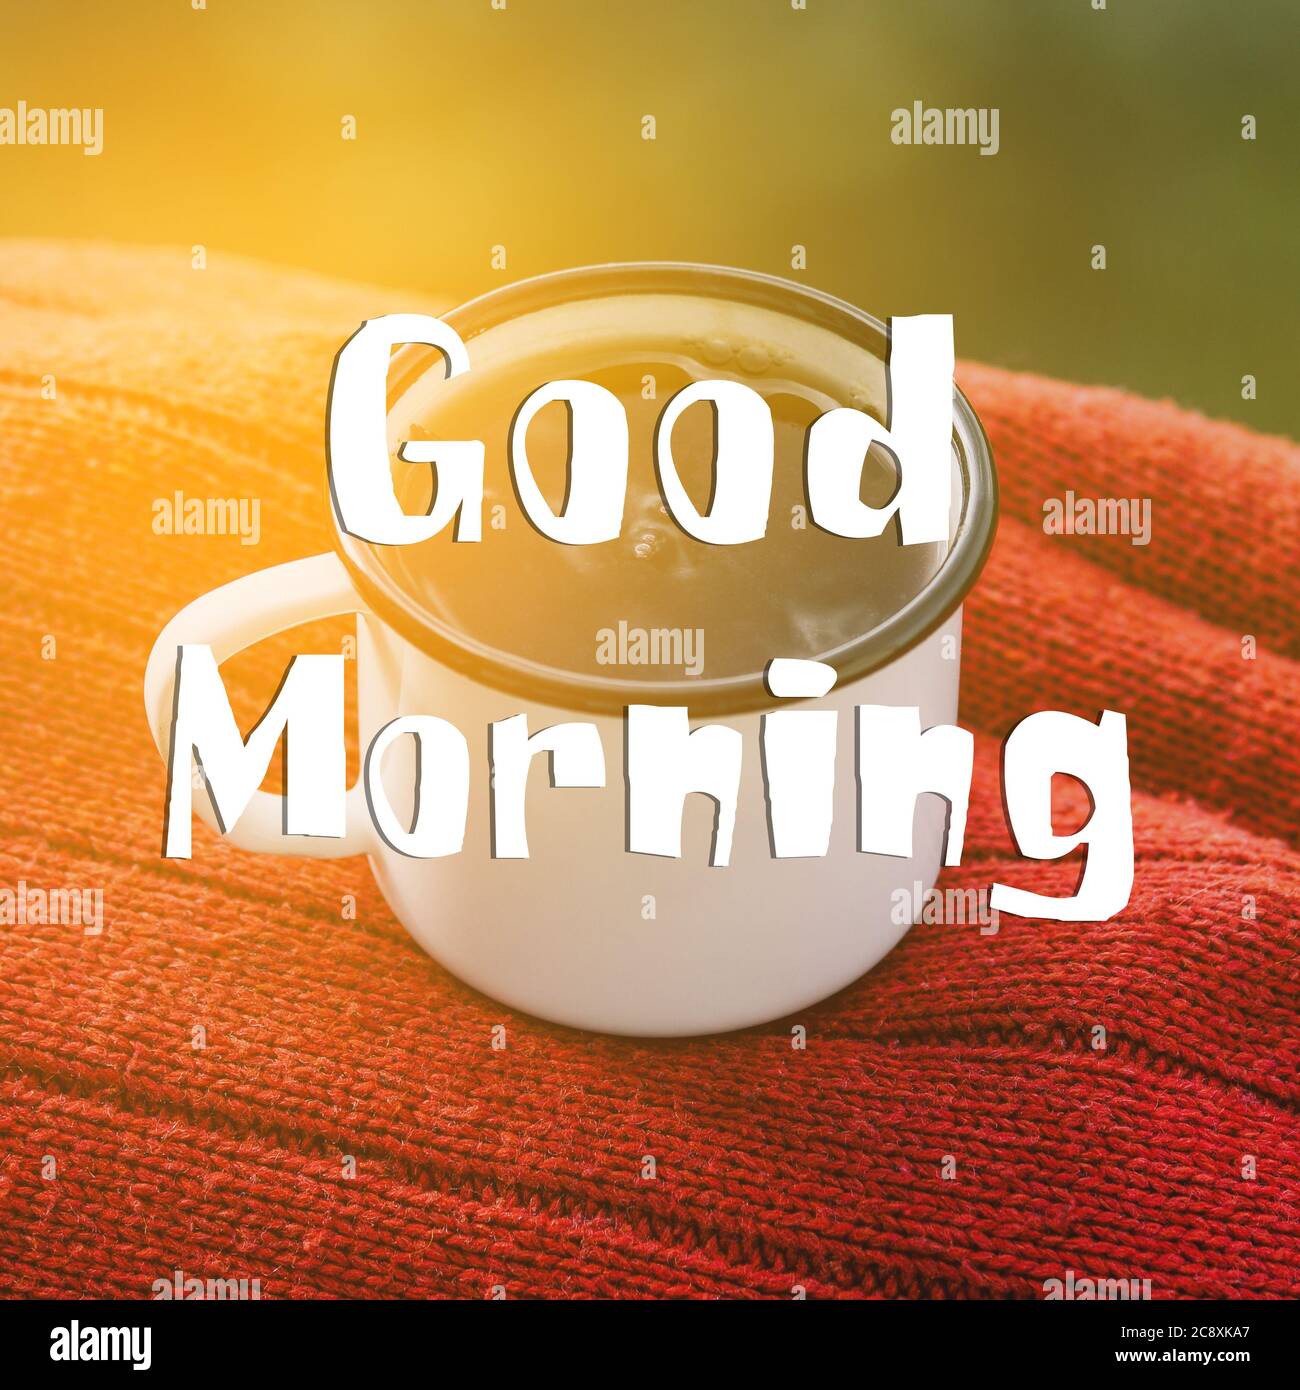 Coffee mug and a sign with the text Good morning. Metal mug on a red sweater. Stock Photo